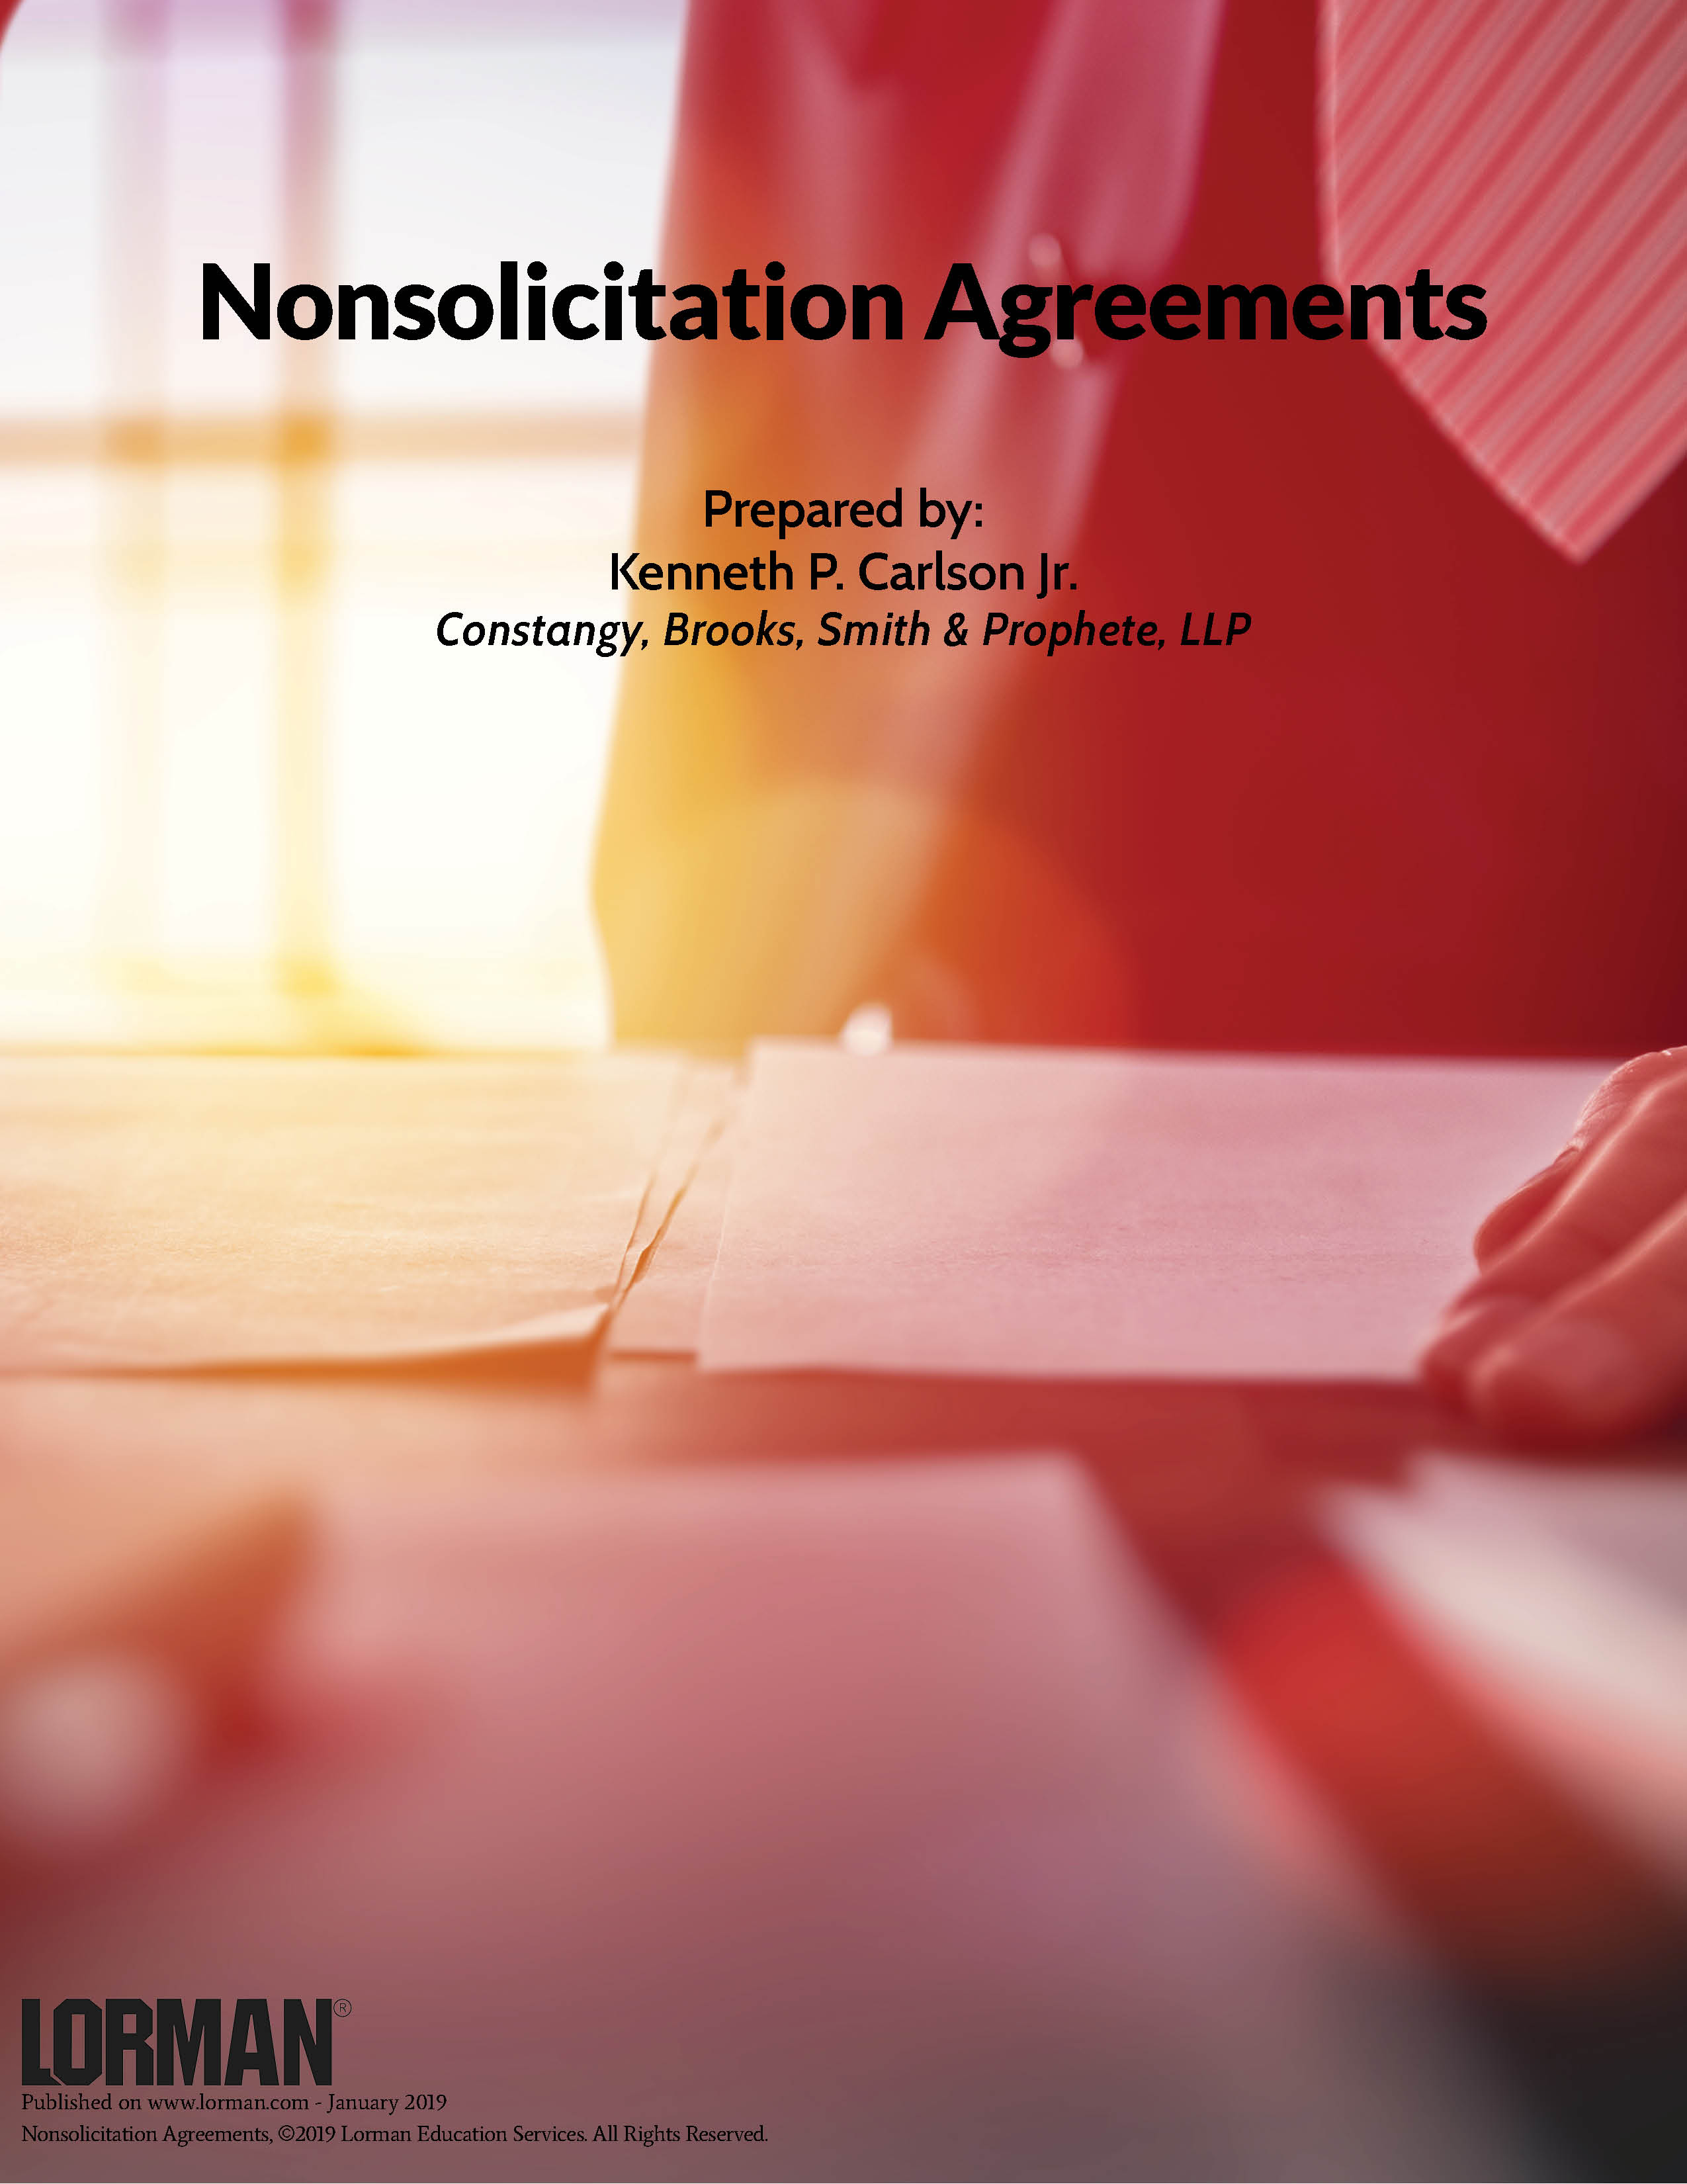 Nonsolicitation Agreements